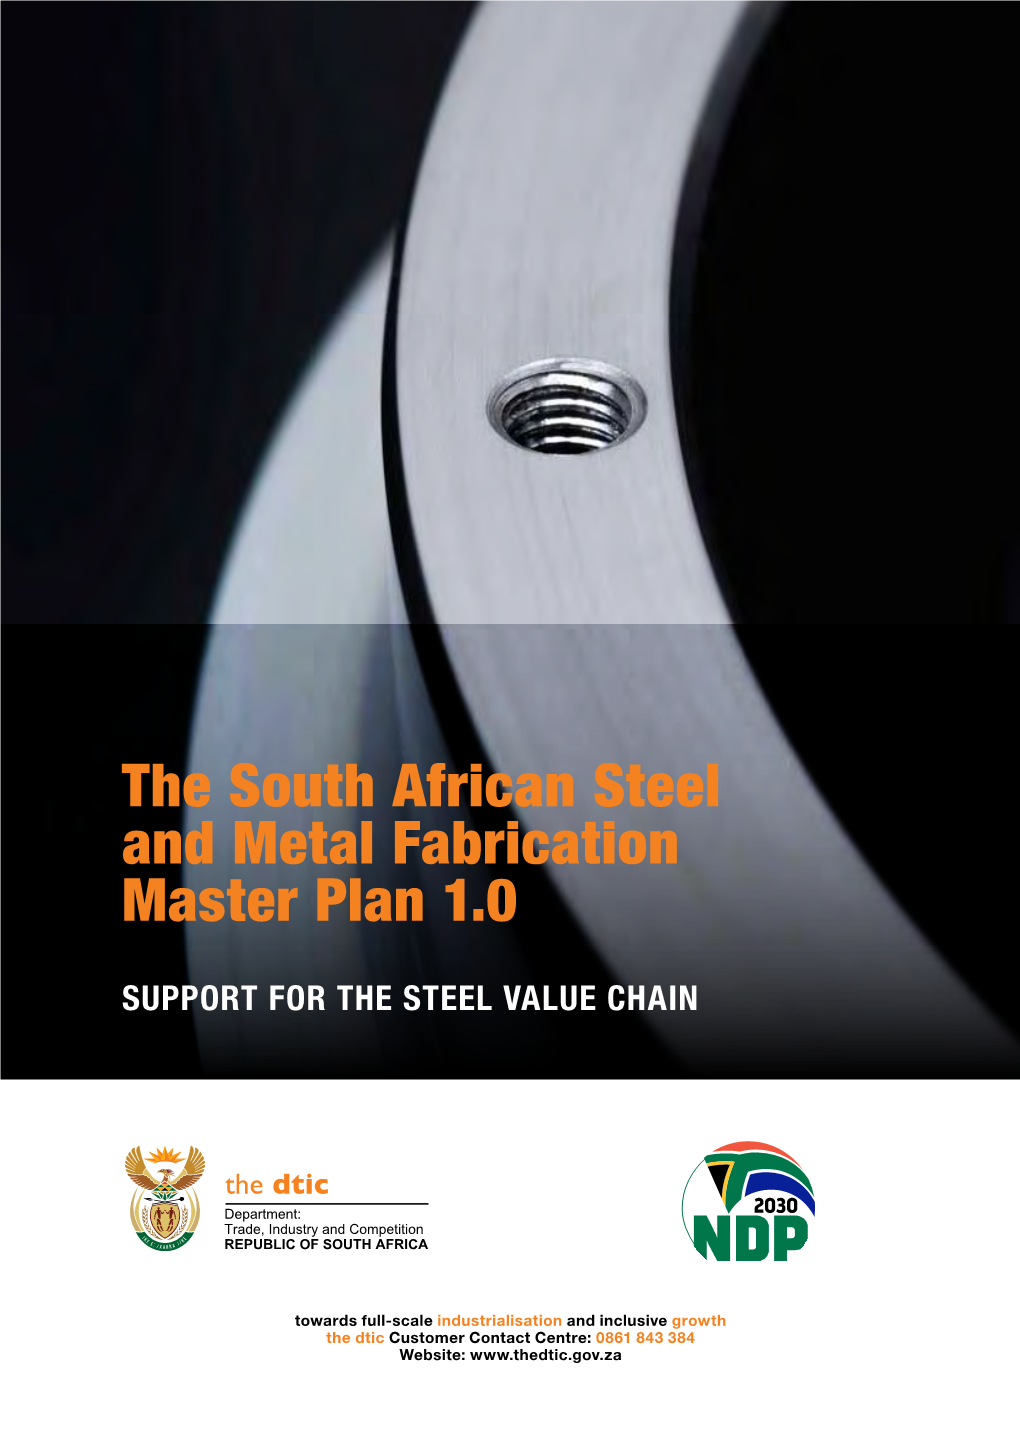 The South African Steel and Metal Fabrication Master Plan 1.0